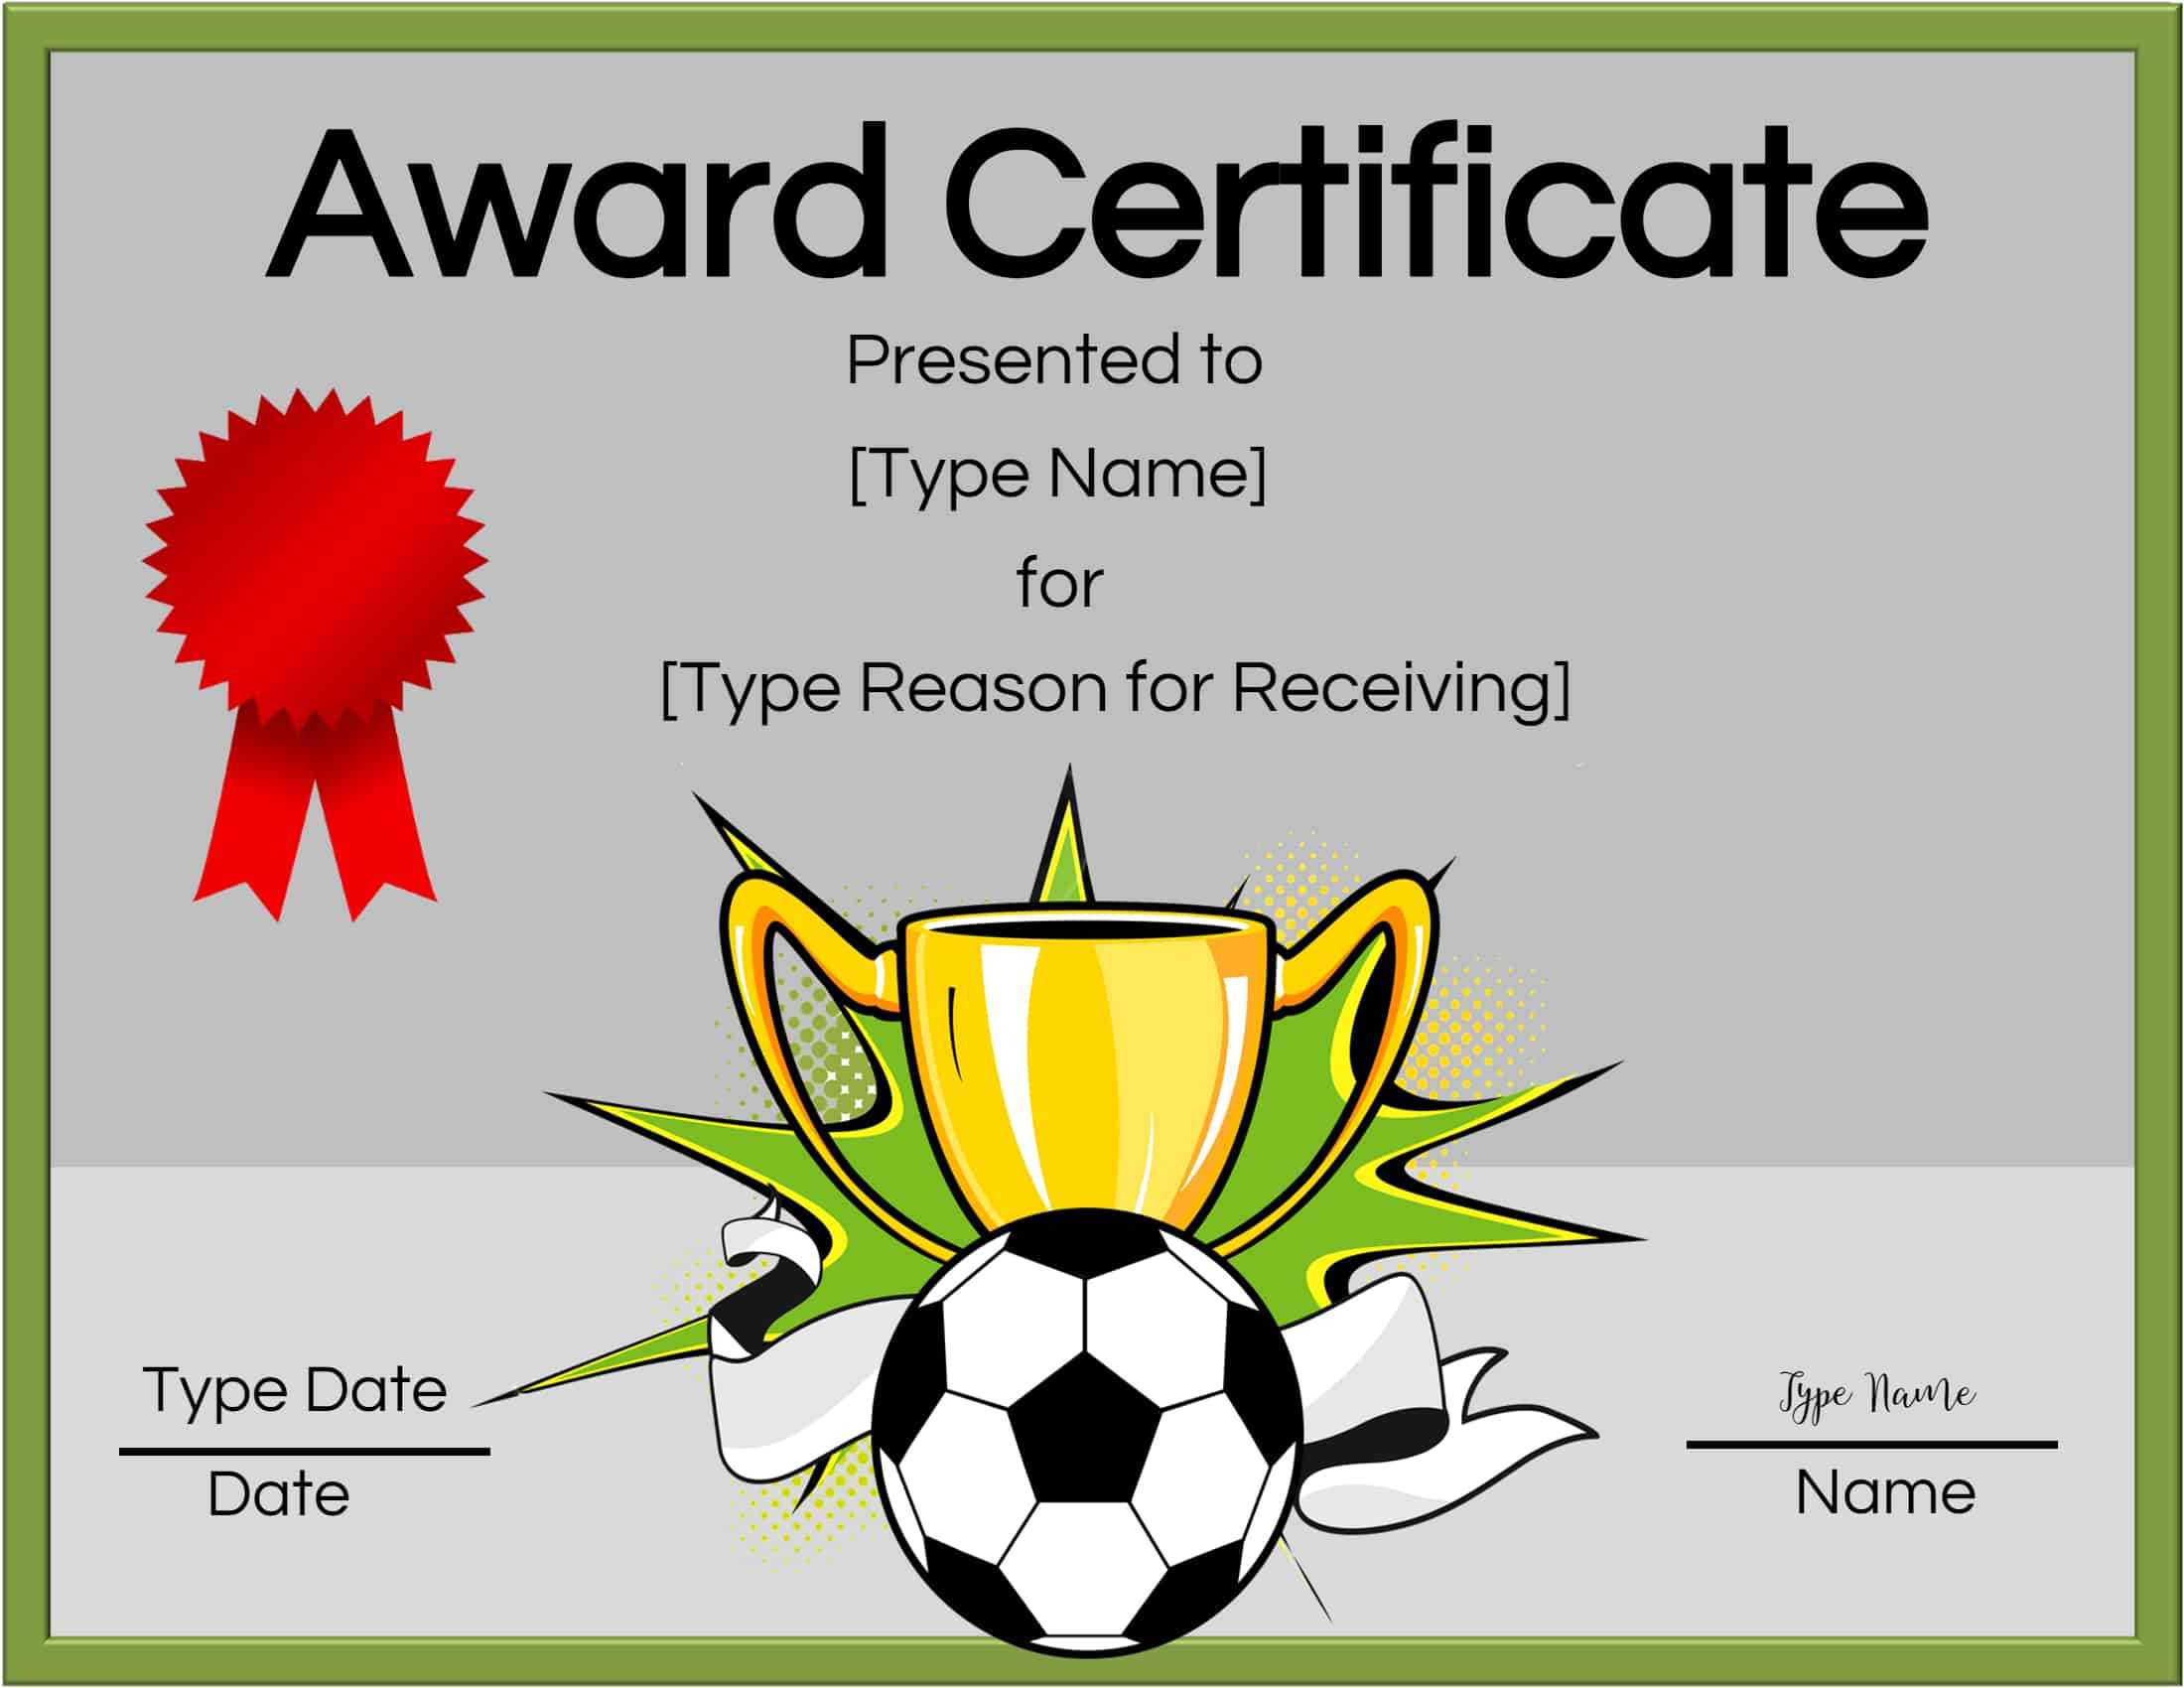 Free Soccer Certificate Maker | Edit Online And Print At Home Within Soccer Certificate Template Free